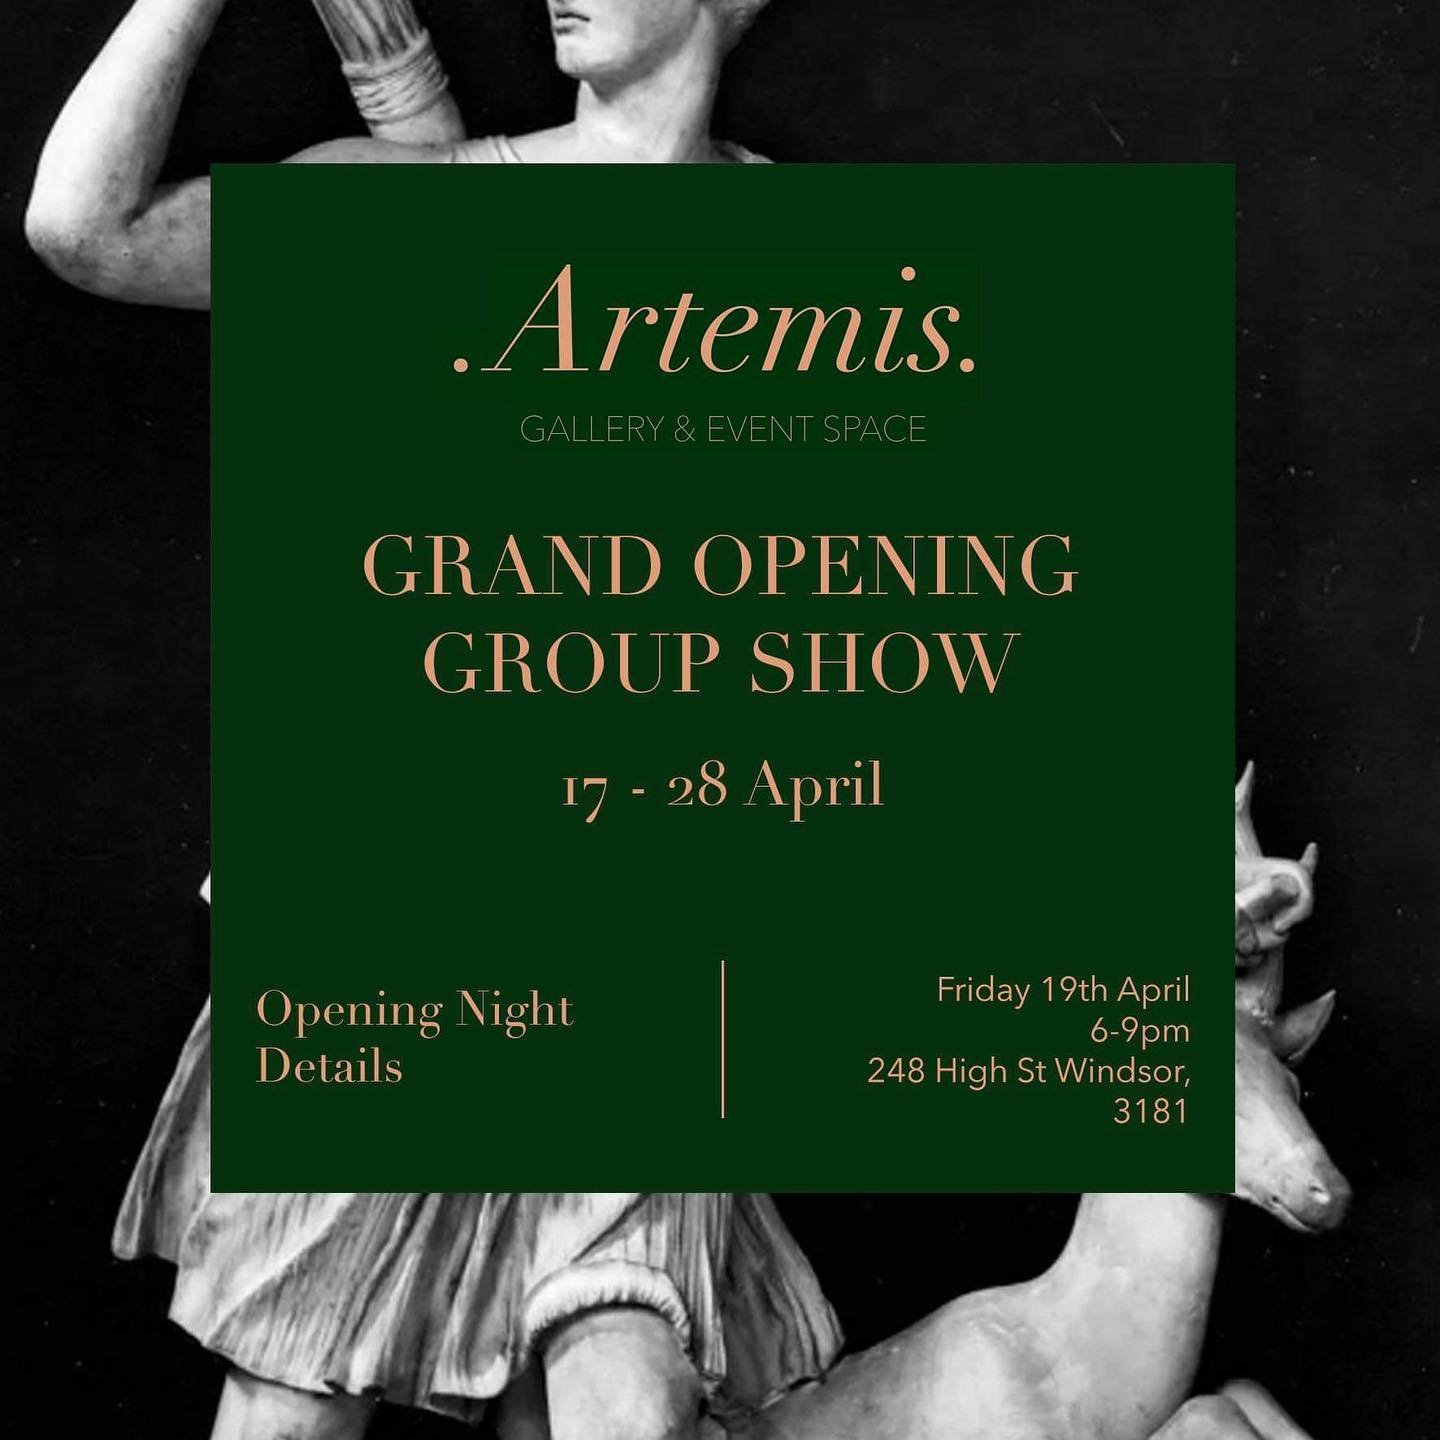 Artemis Gallery
&ldquo;Grand Opening Show&rdquo;

Opening Night on 19th April 
6 - 9pm 

Come check this amazing new space taking off!! 

Joining a group show of a new gallery opening up, I will be attending the opening night. Hope to see you there!
